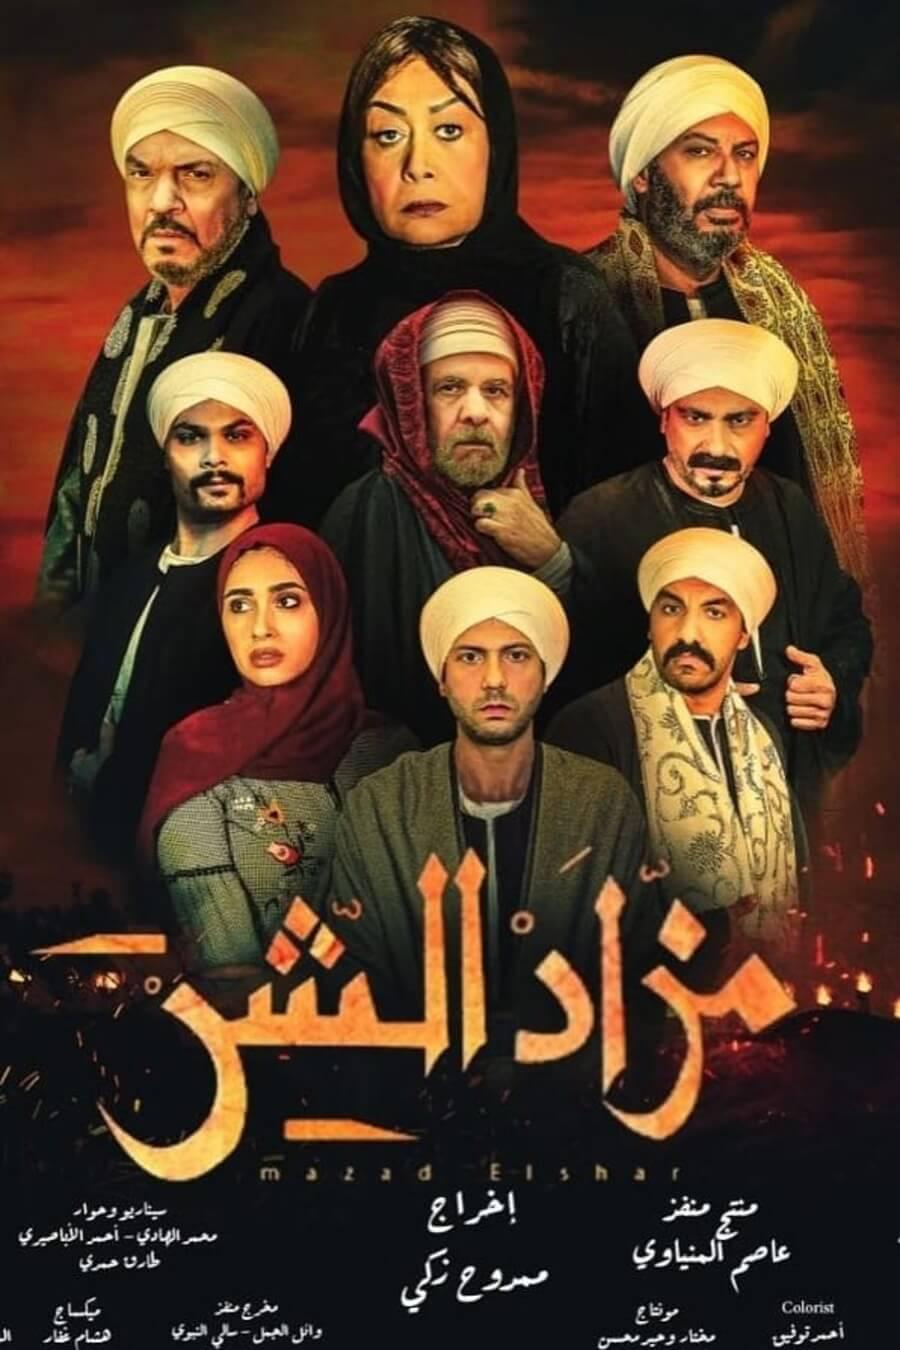 TV ratings for Mazad El Shar (مزاد الشر) in Spain. TOD TV series